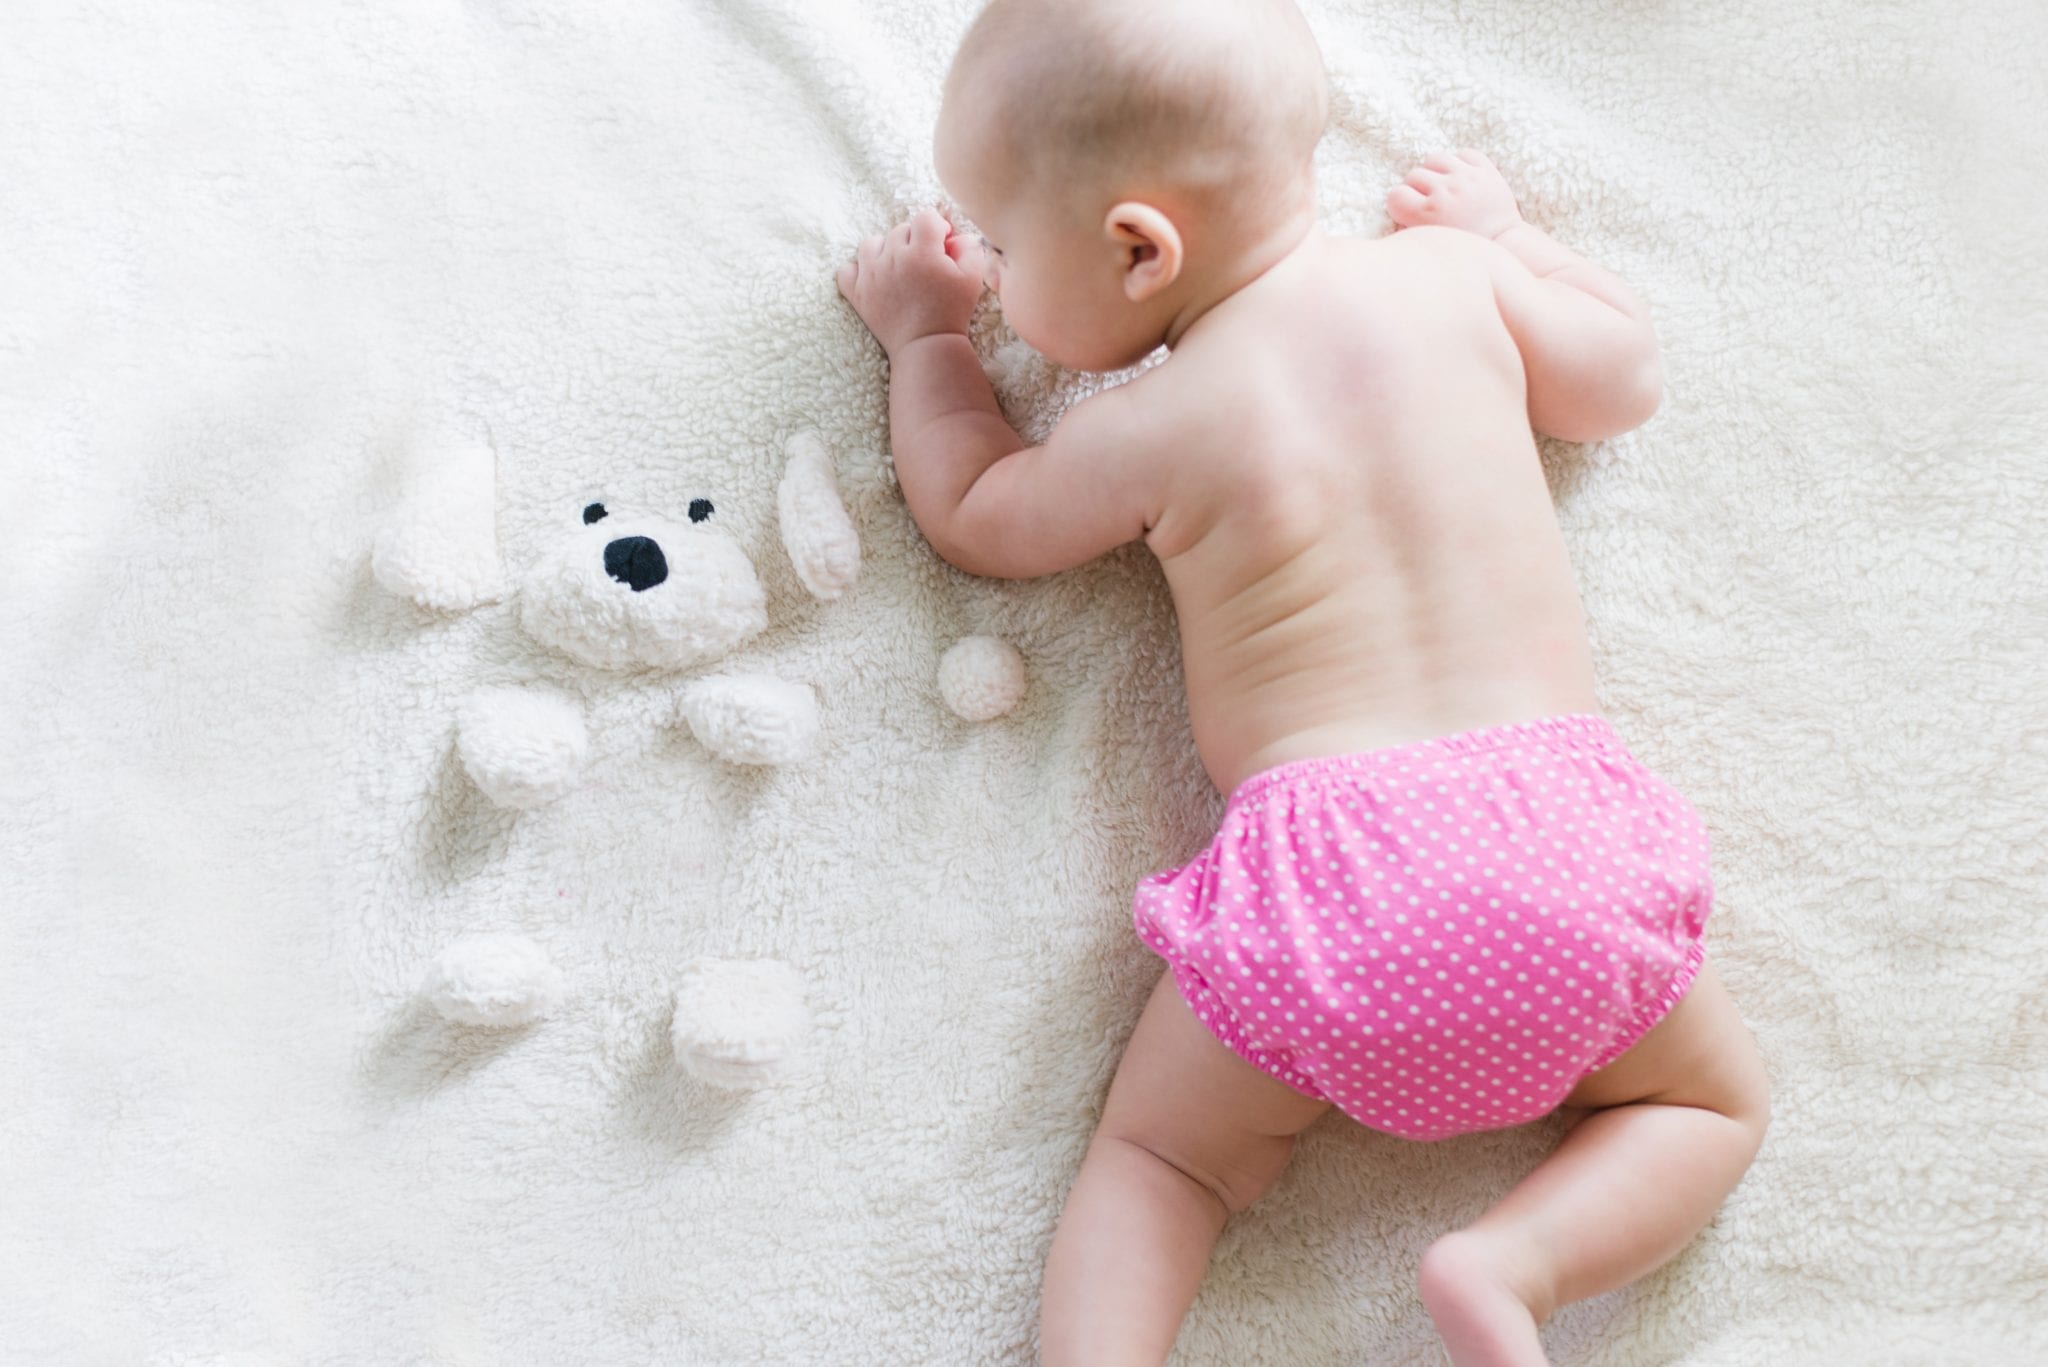 Tummy time for baby